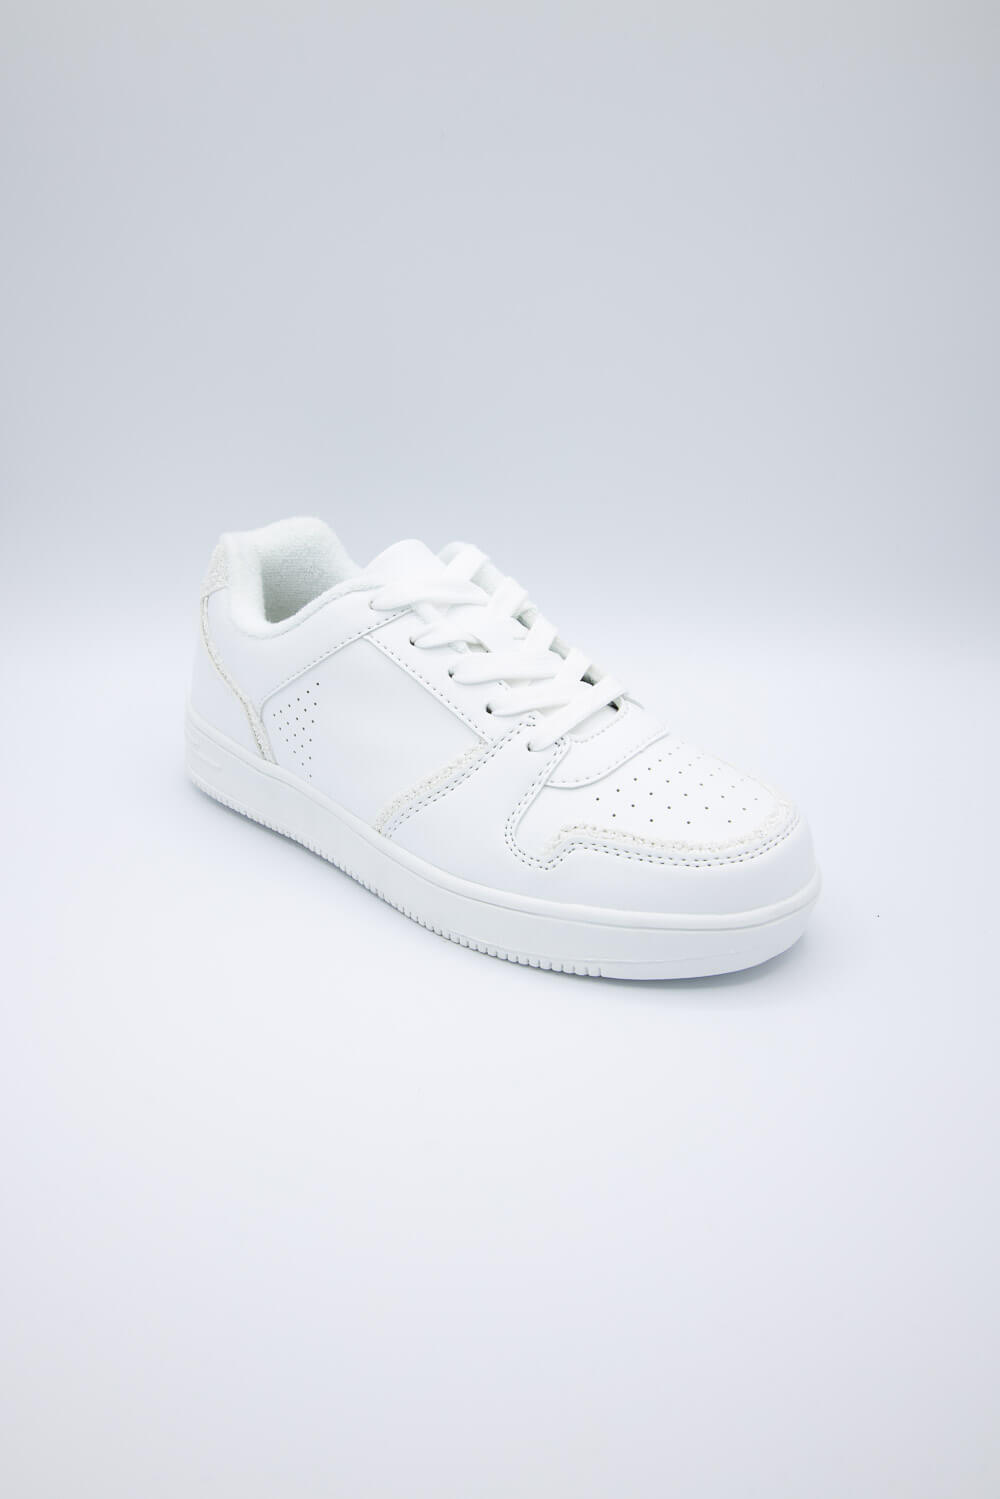 001 Very G BB Low Sparkle Sneakers for Women in White VGSP0189 WHITE